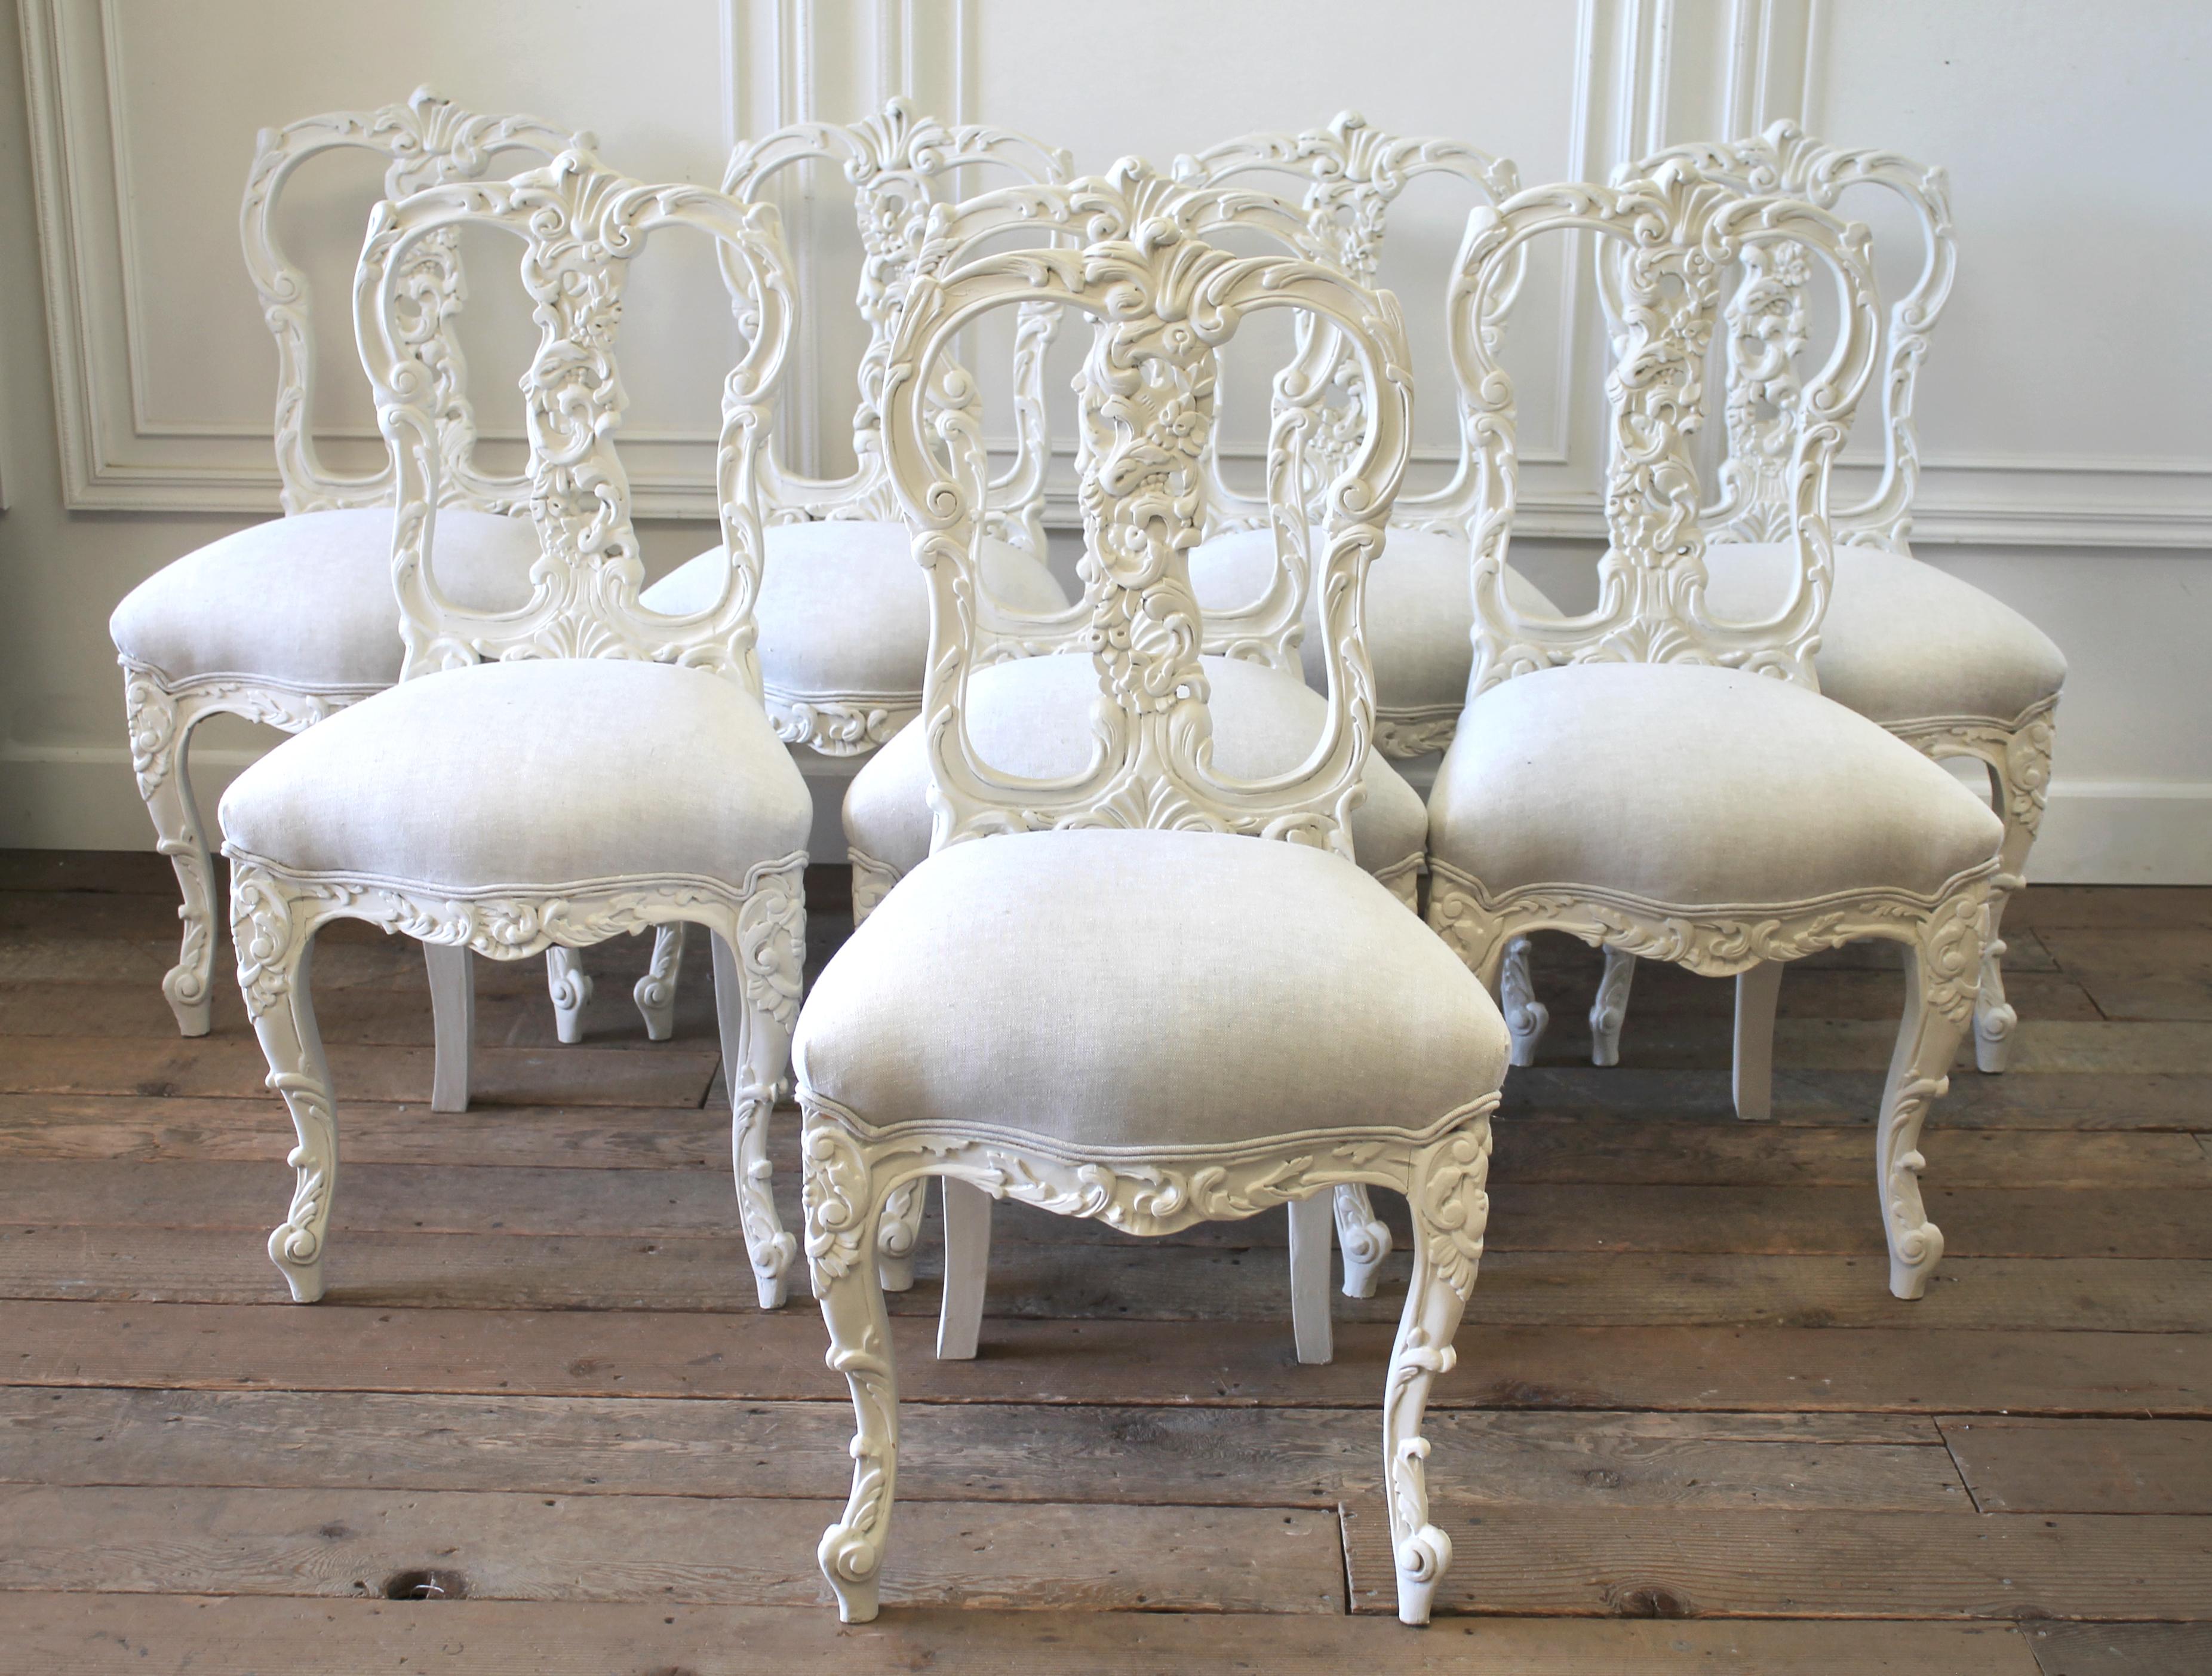 Set of 8 white carved and painted dining chairs
Lots of beautiful detailed carving along the inside back and legs. We reupholstered these in a light natural linen, finished with a double welt trim. Each chair is solid and sturdy ready for everyday